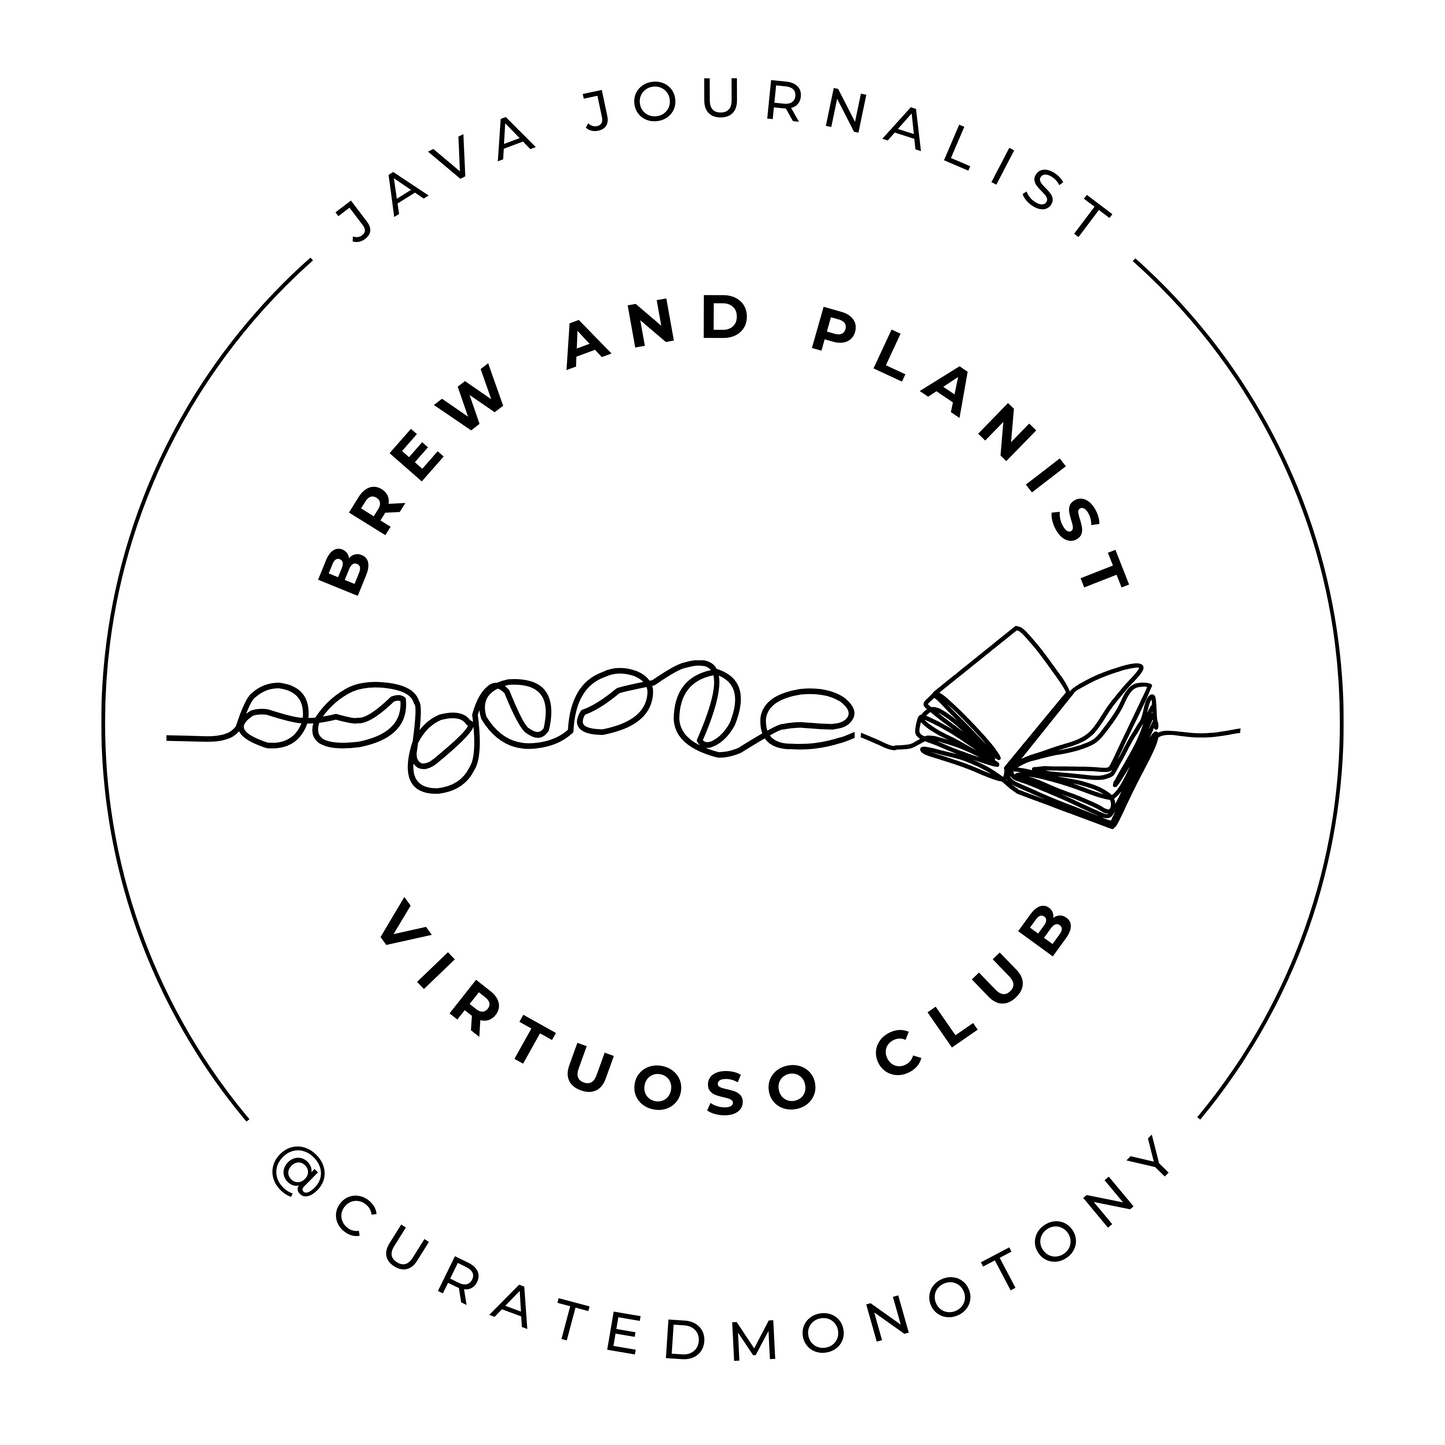 Printable CM Cafe Brew and Planist Virtuoso Club Membership and Badges